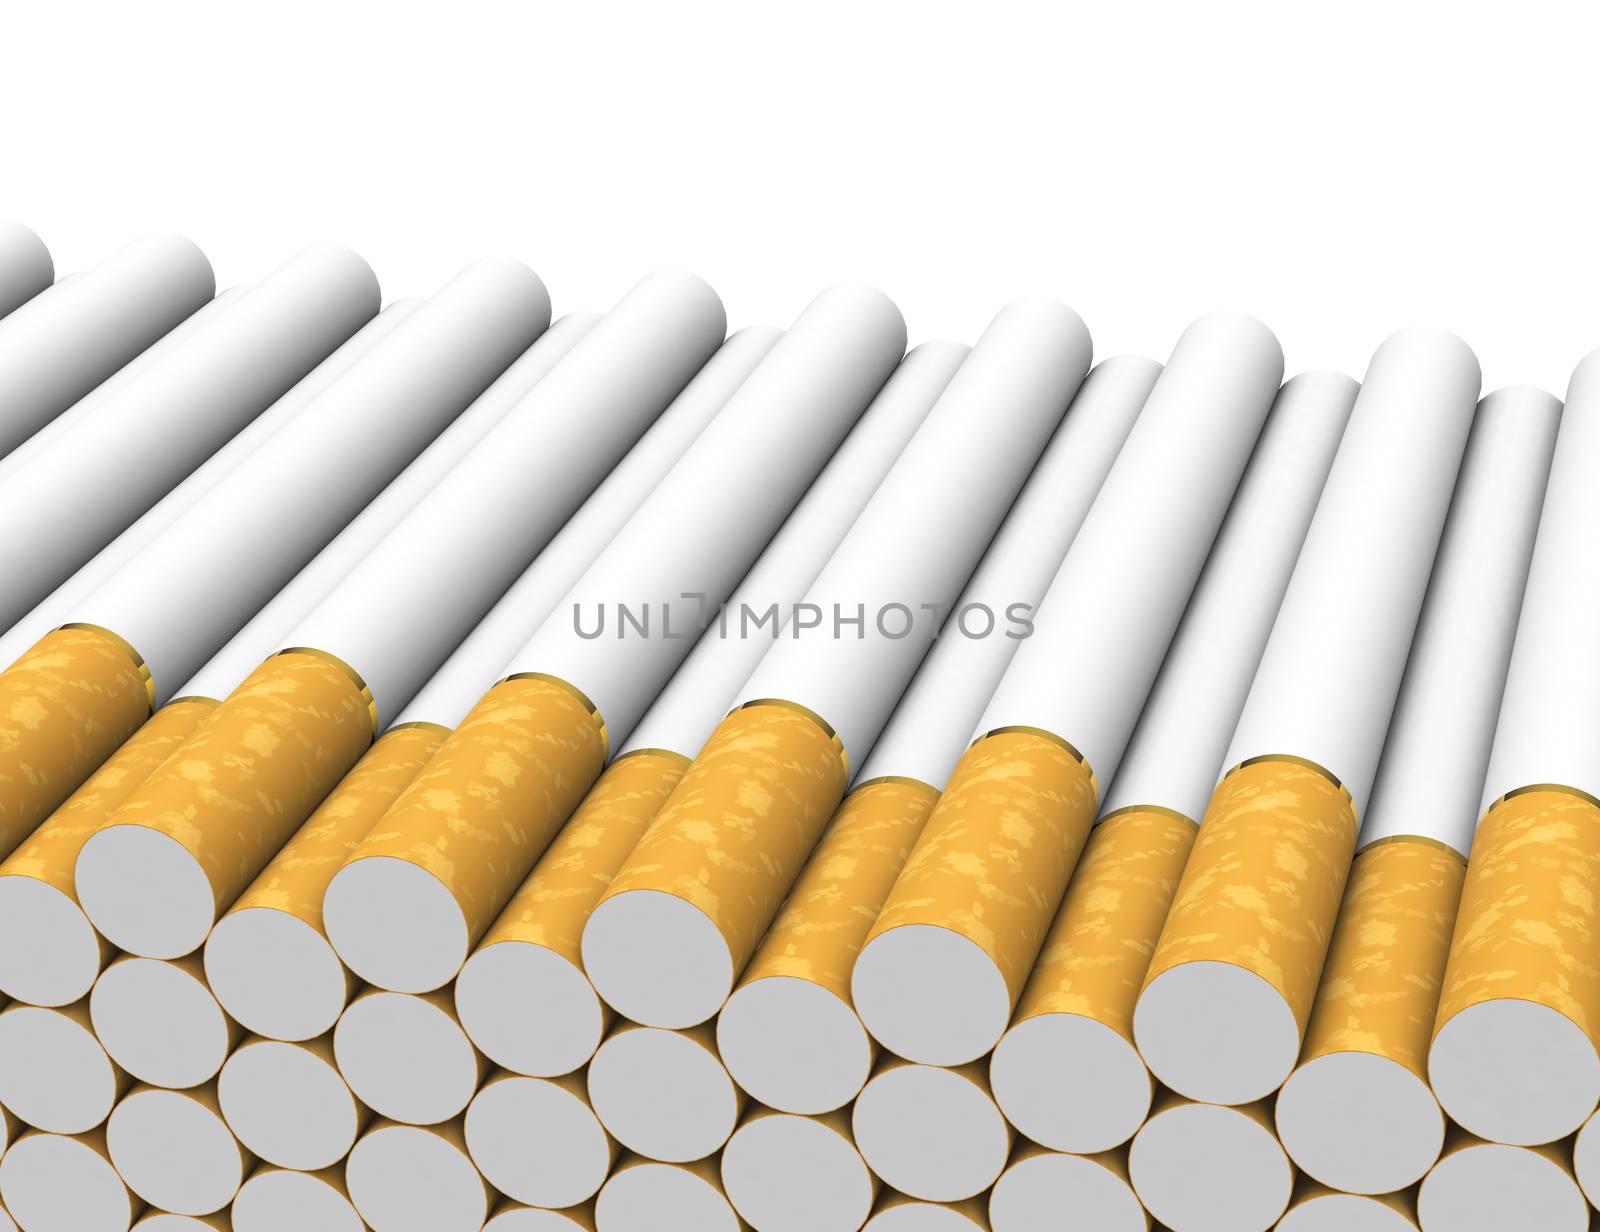 The picture shows some cigarettes